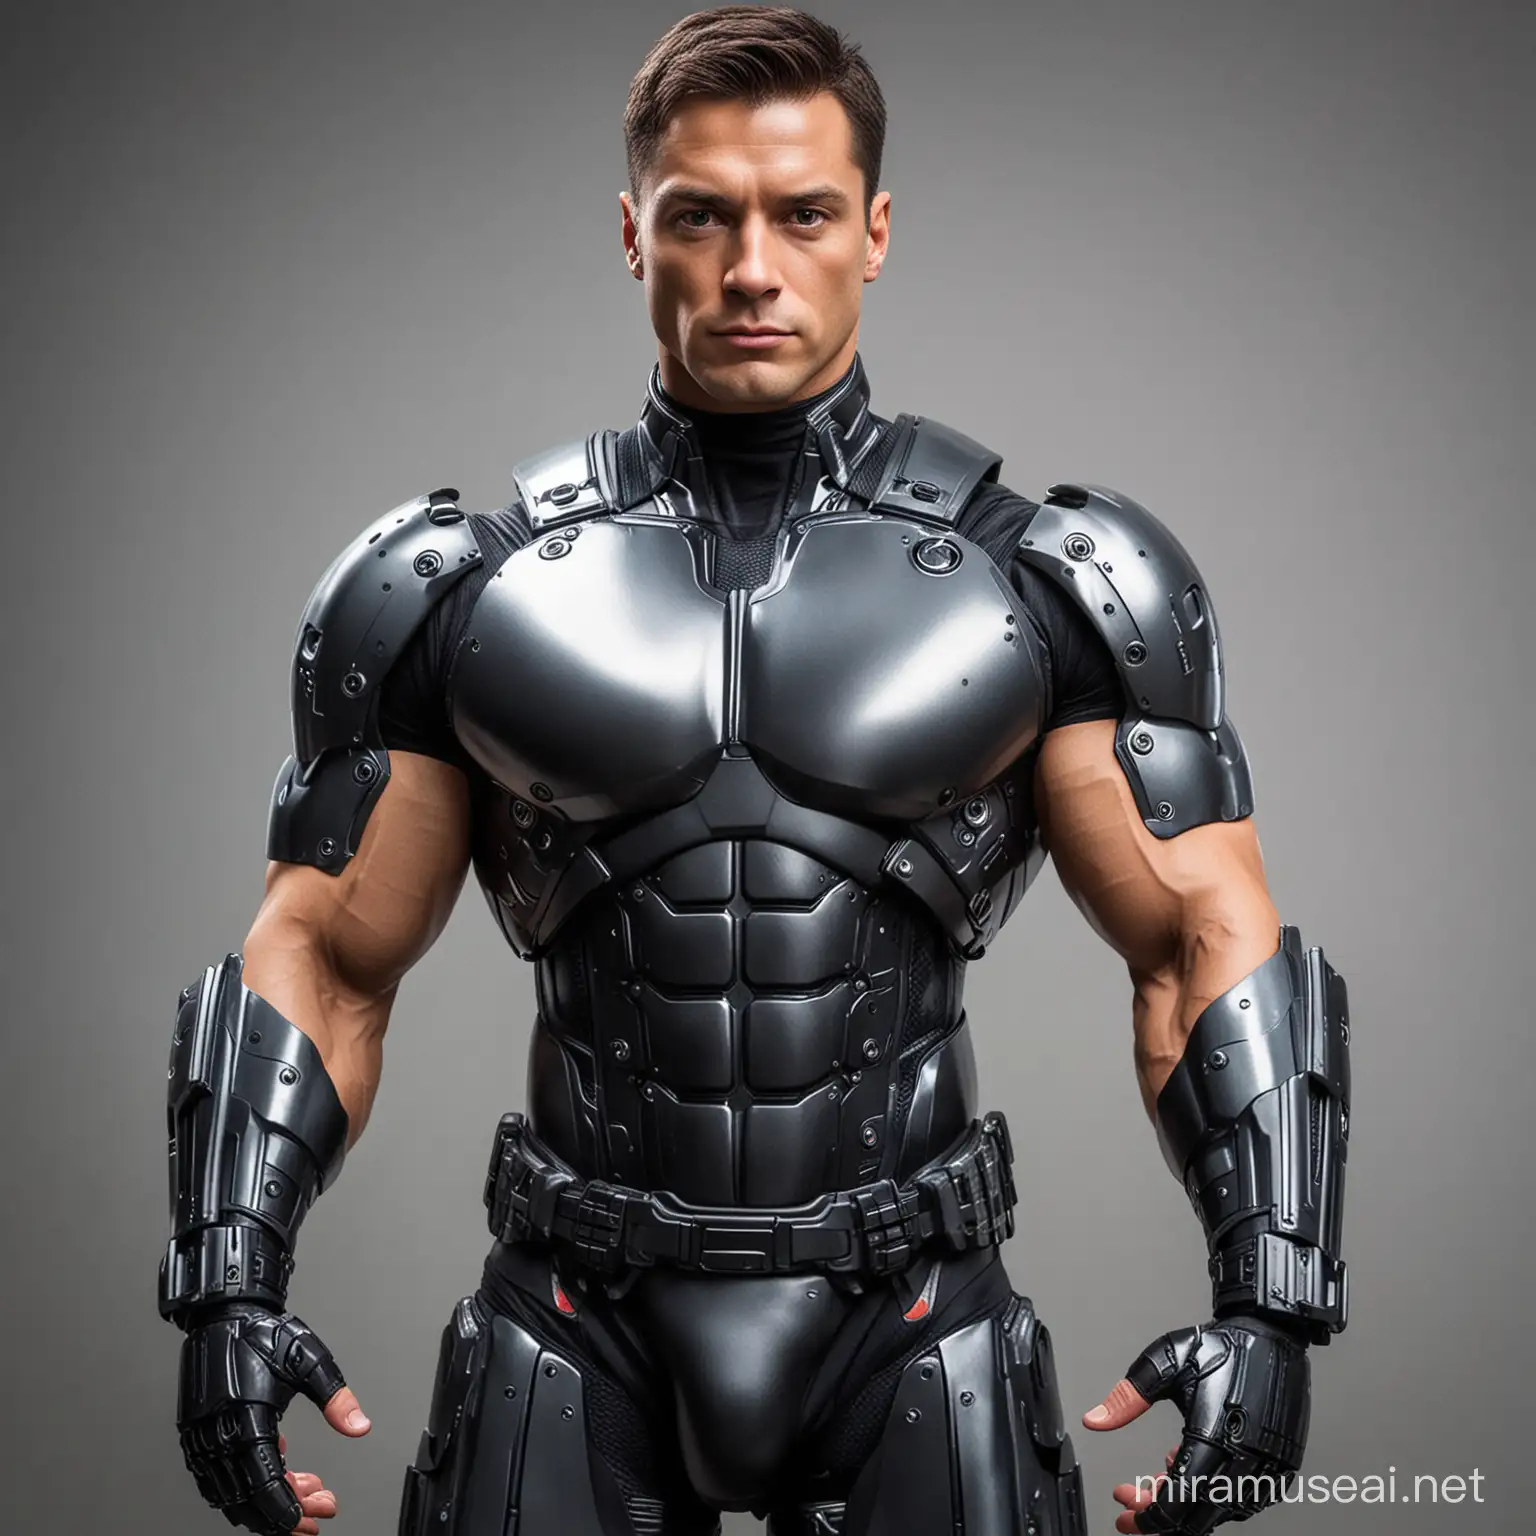 Muscular White Male RoboCop in Full View Posing for Selfie YouTube Video